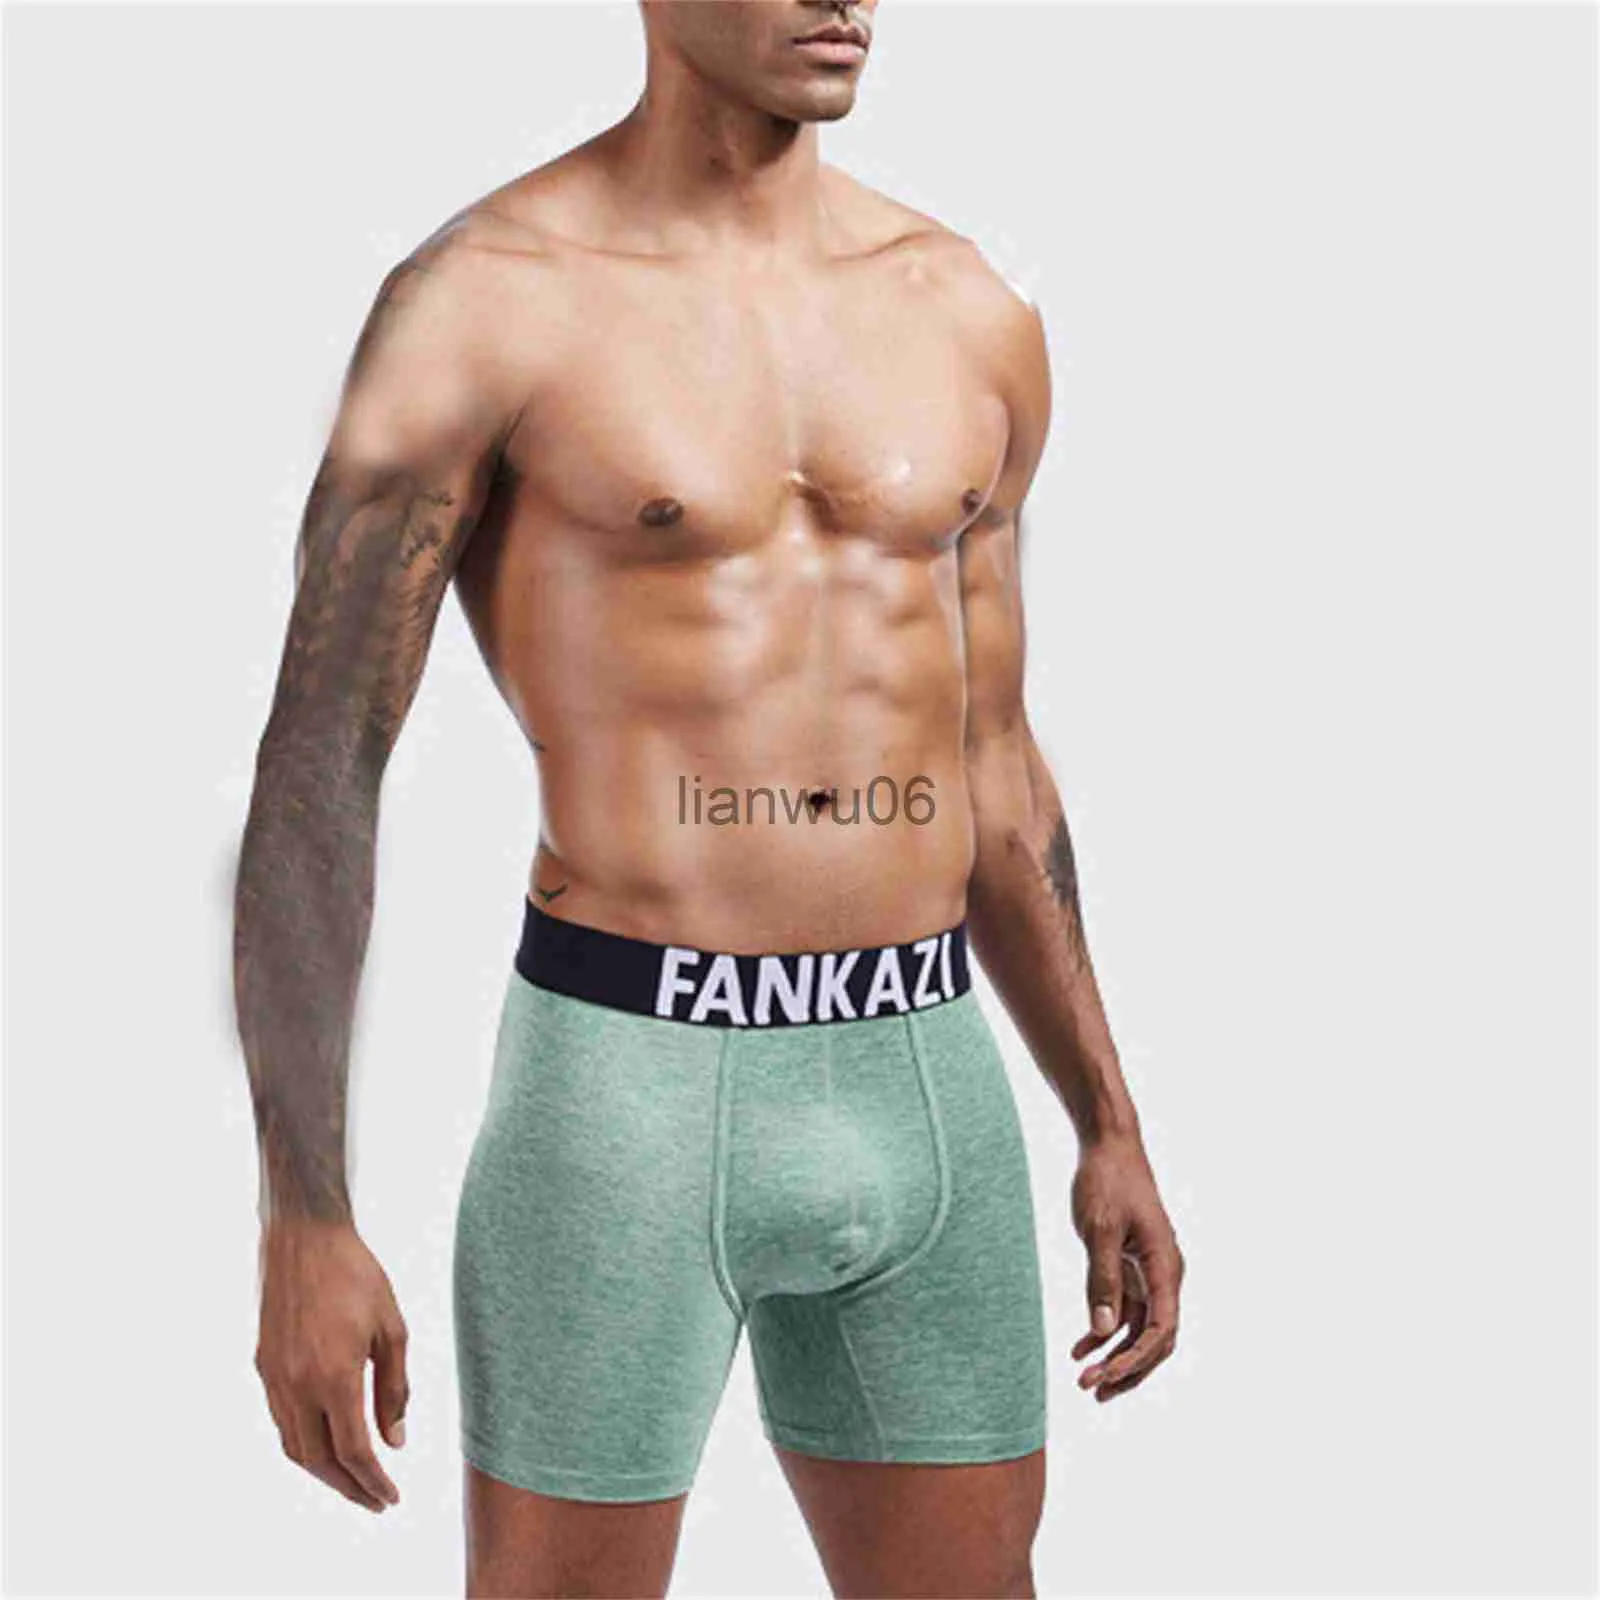 Mens Seamless Boxer Seamless Gym Shorts With Fly Pouch Breathable